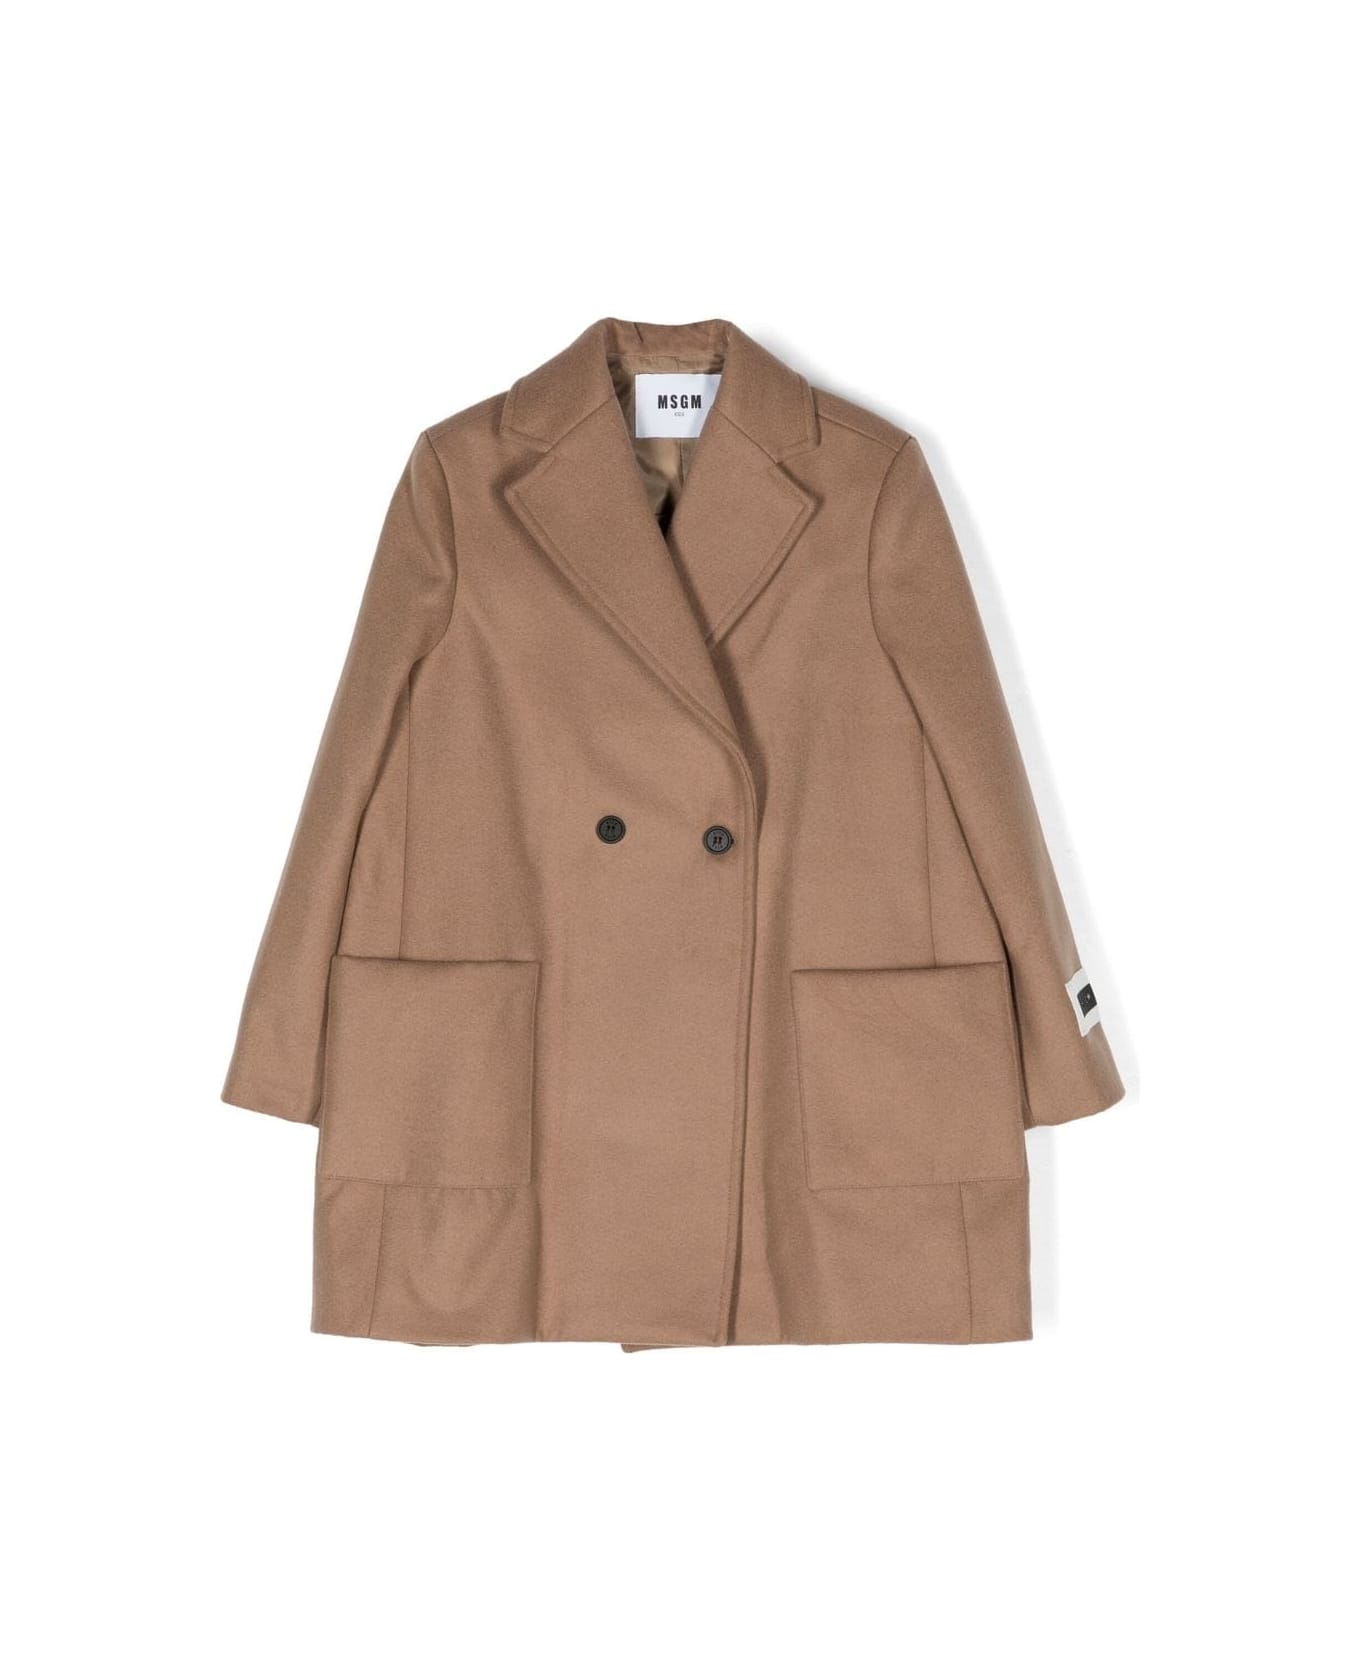 MSGM Brown Wool Blend Single-breasted Coat - Biscotto